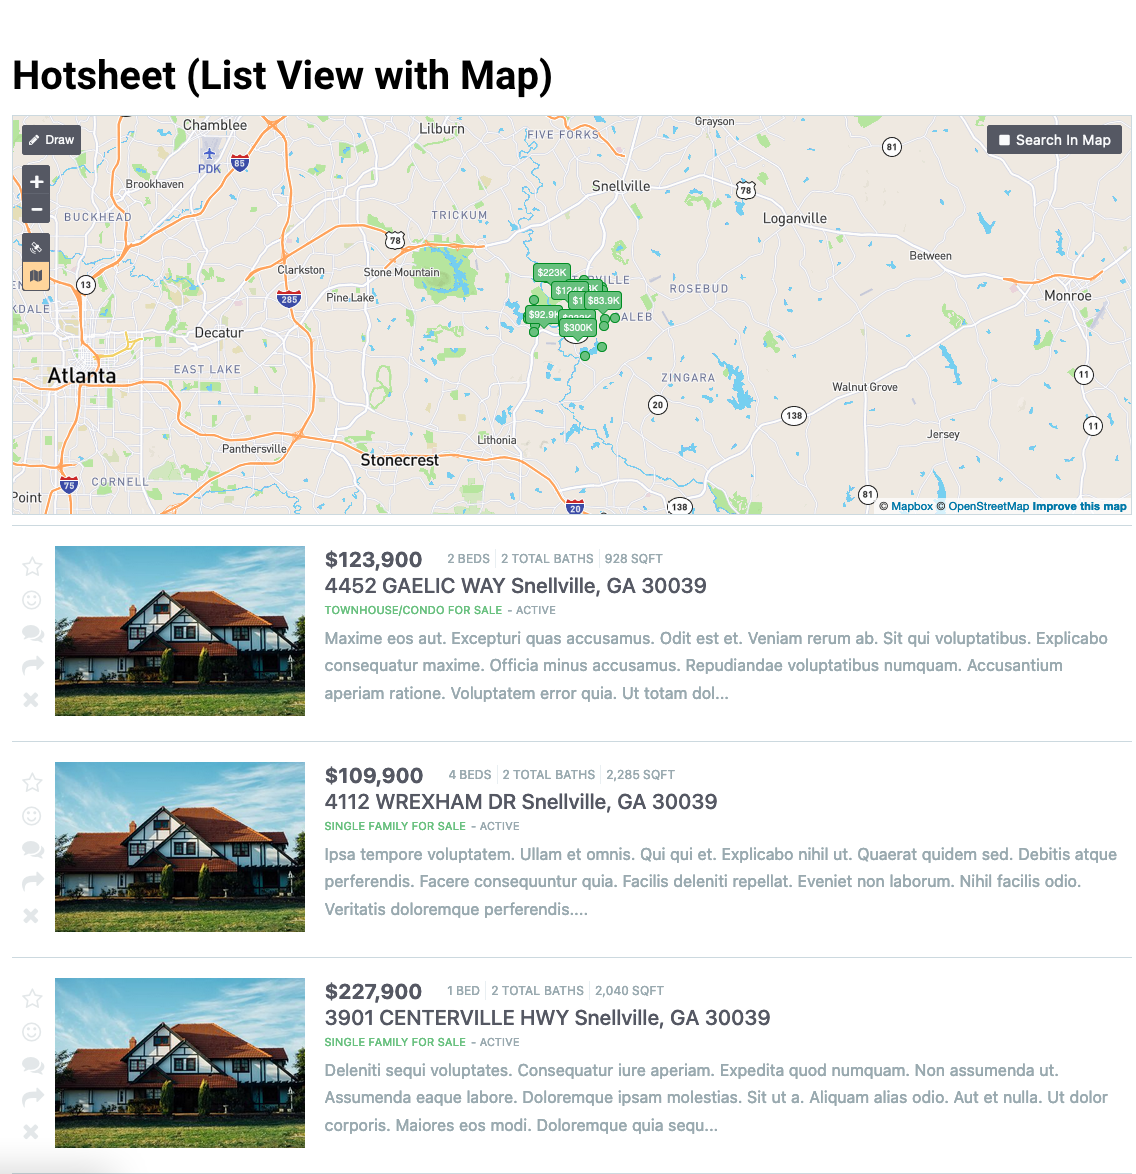 Hotsheet Example - List View With Map